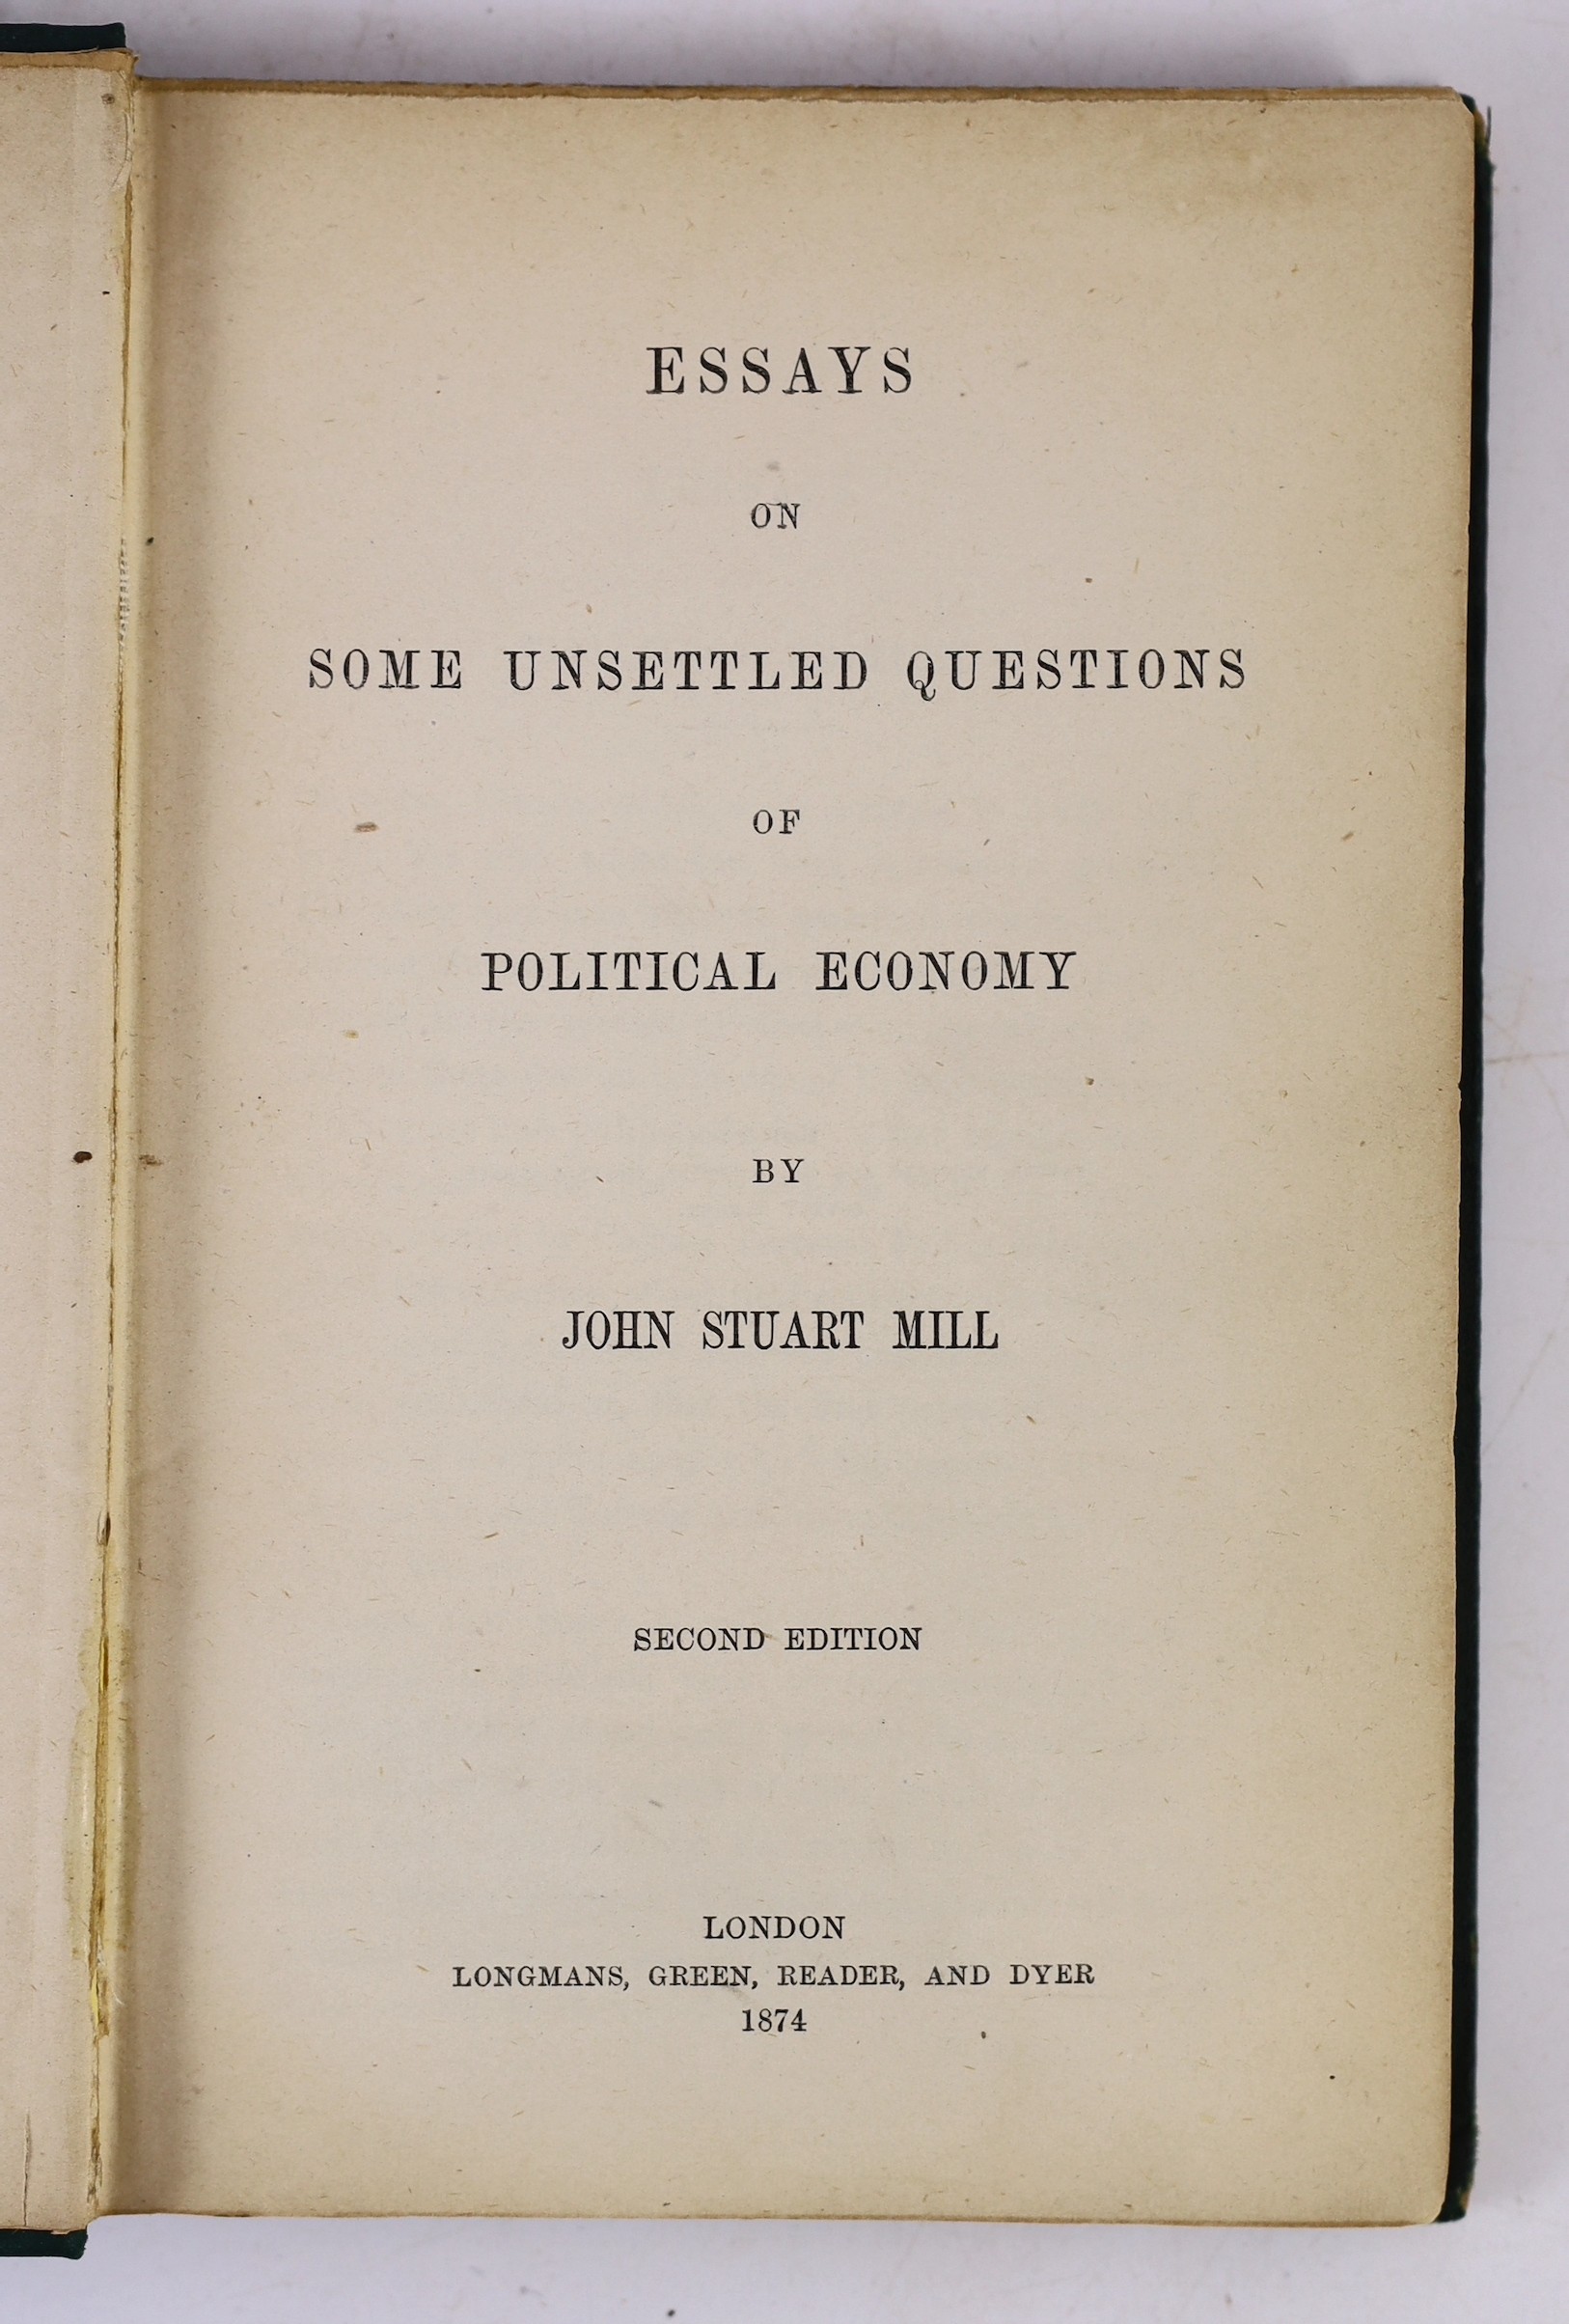 Mill, John Stuart-Autobiography. First Edition. half title, erratum slip and advert. leaf; original black and gilt-ruled and gilt lettered cloth. 1873; Mill, John Stuart - Essays on Some Unsettled Questions of Political